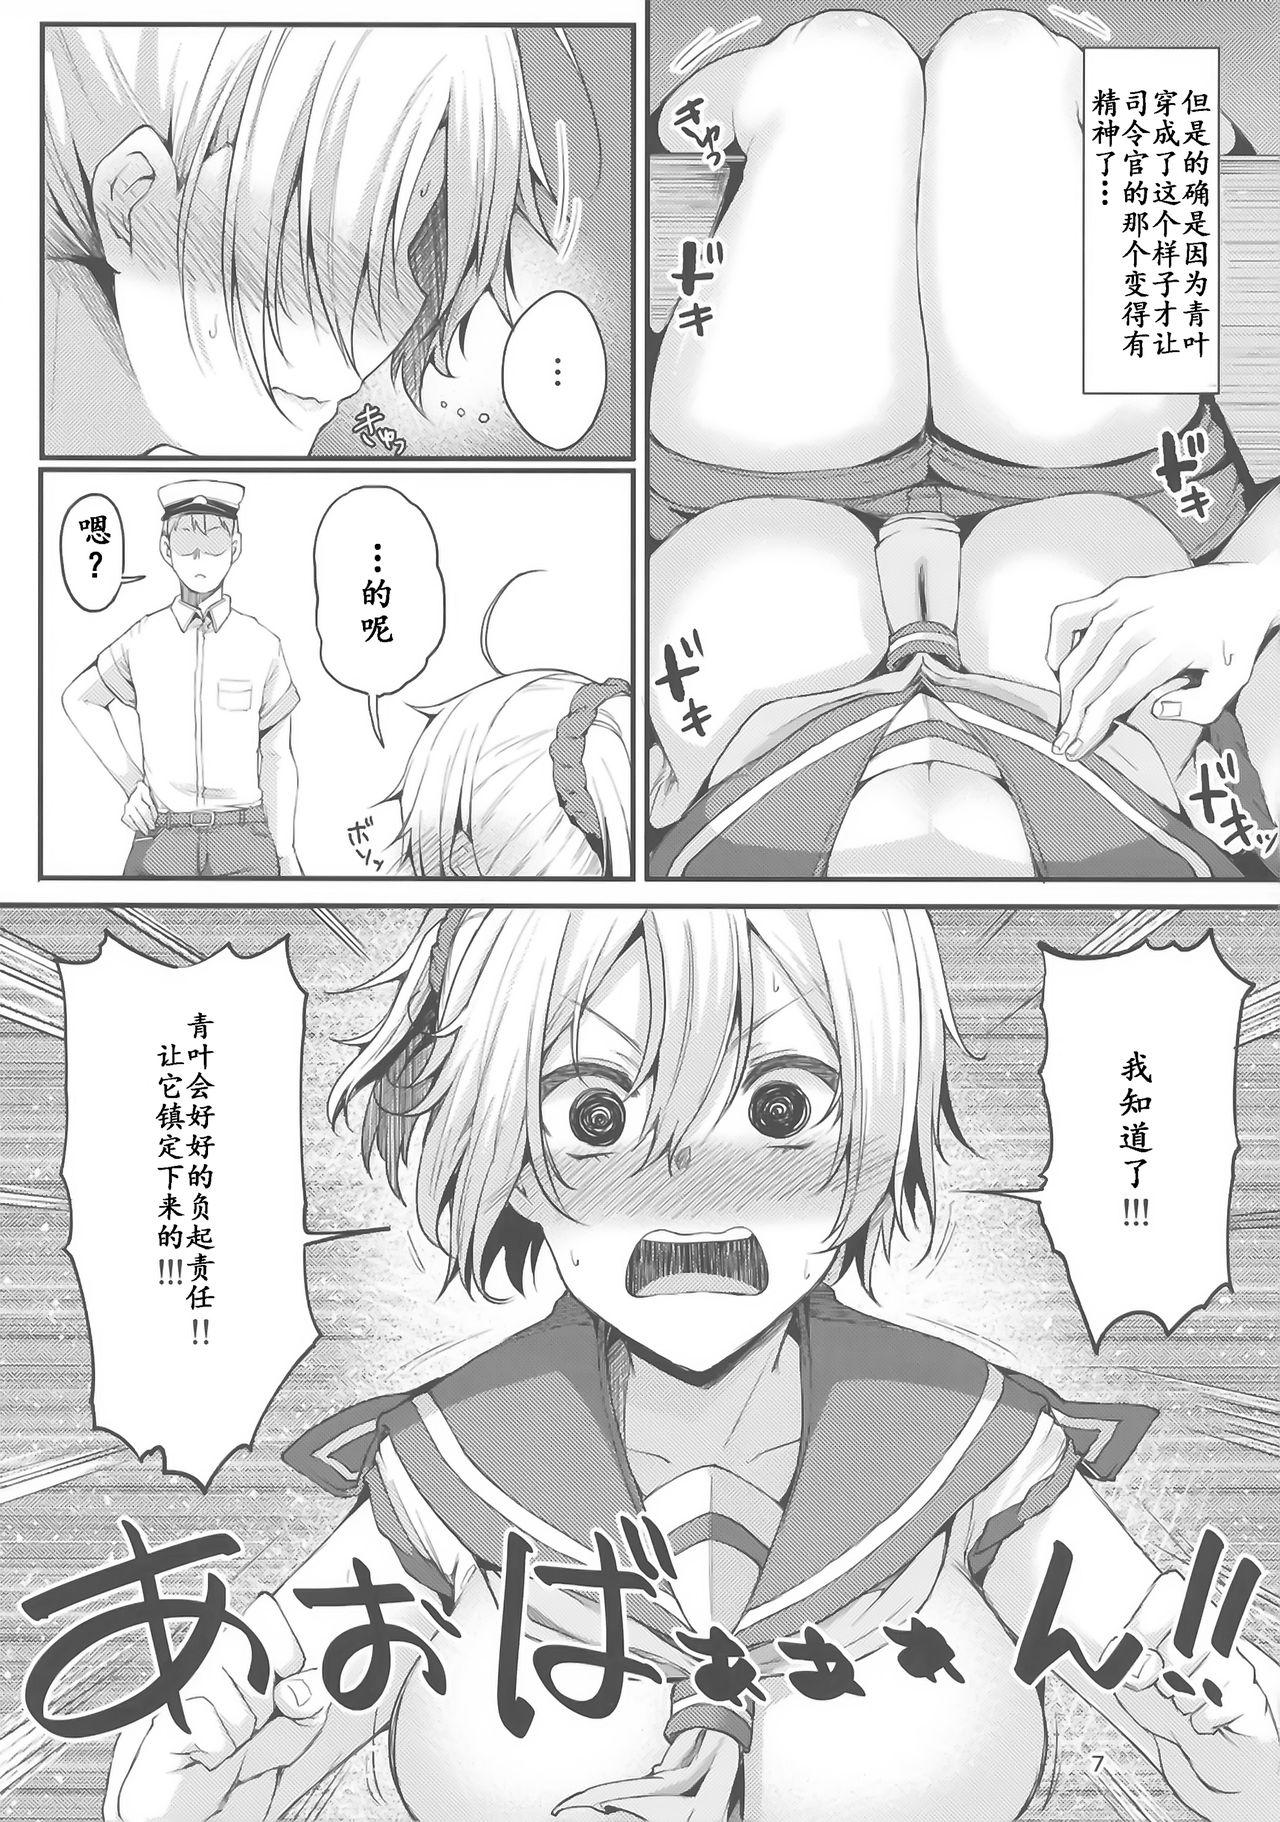 Clit Motto x2 Aobax! - Kantai collection Hot Pussy - Page 8